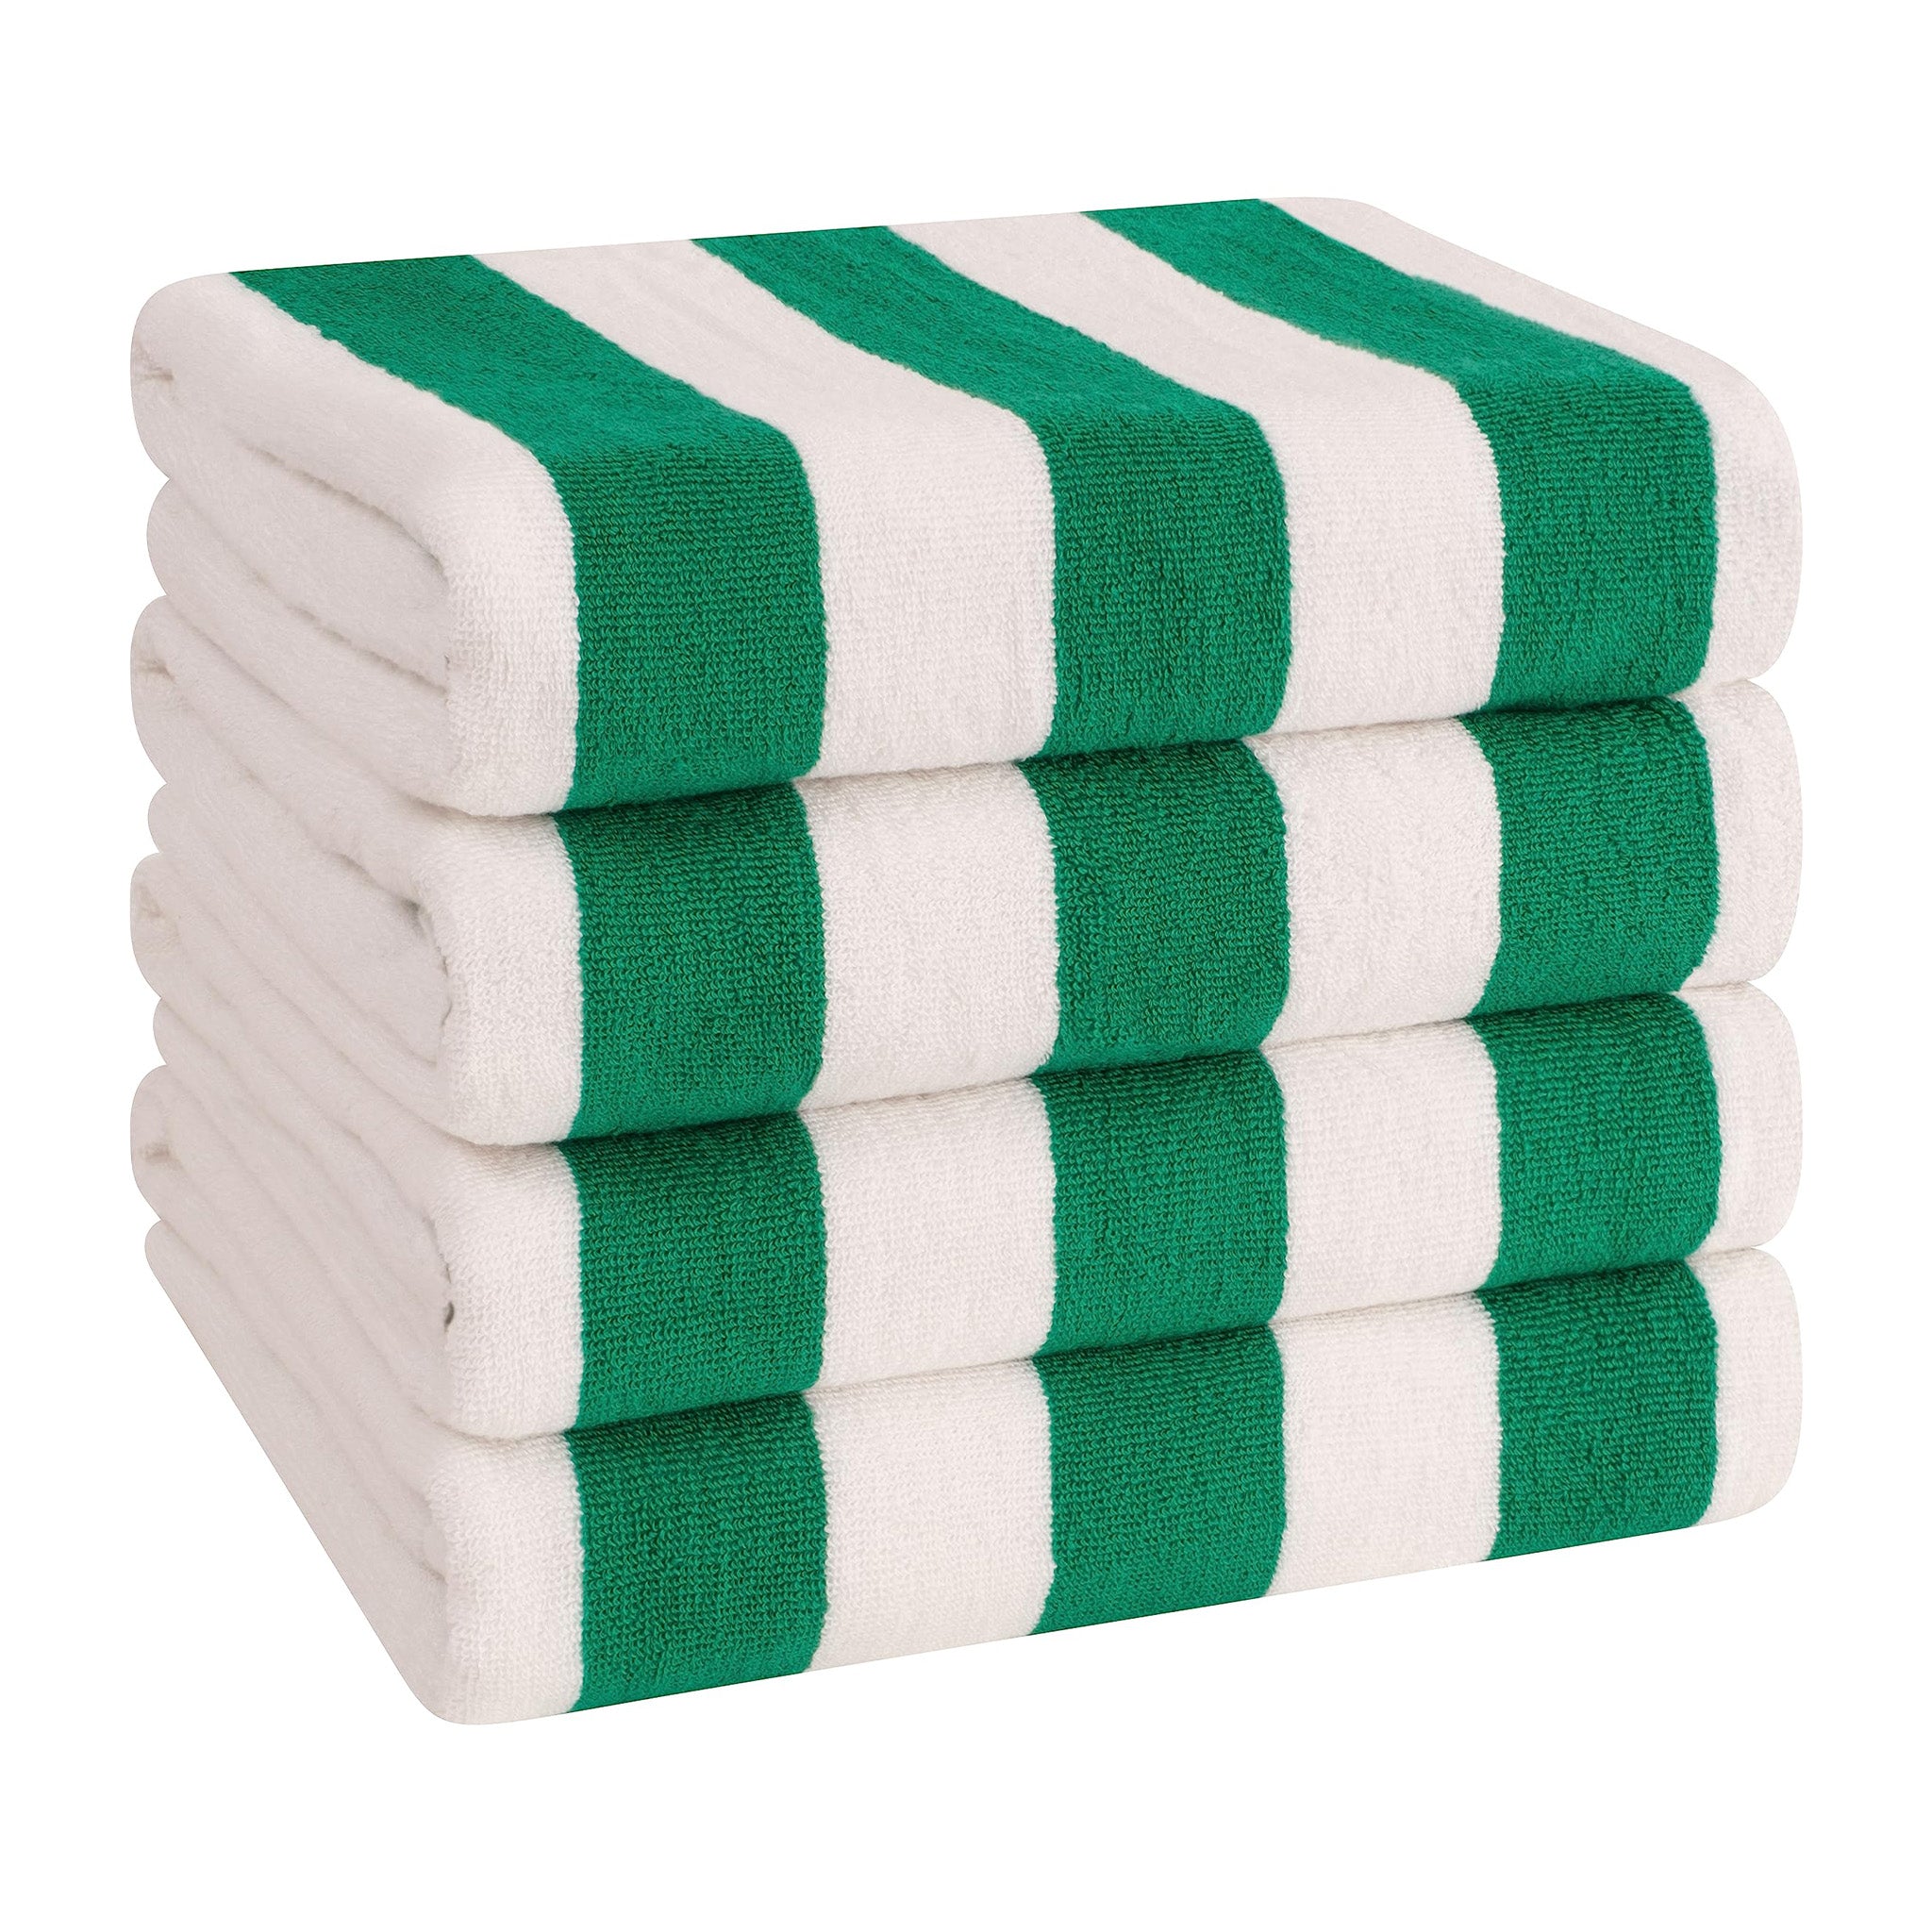 American Soft Linen 100% Cotton 4 Pack Beach Towels Cabana Striped Pool Towels -green-1